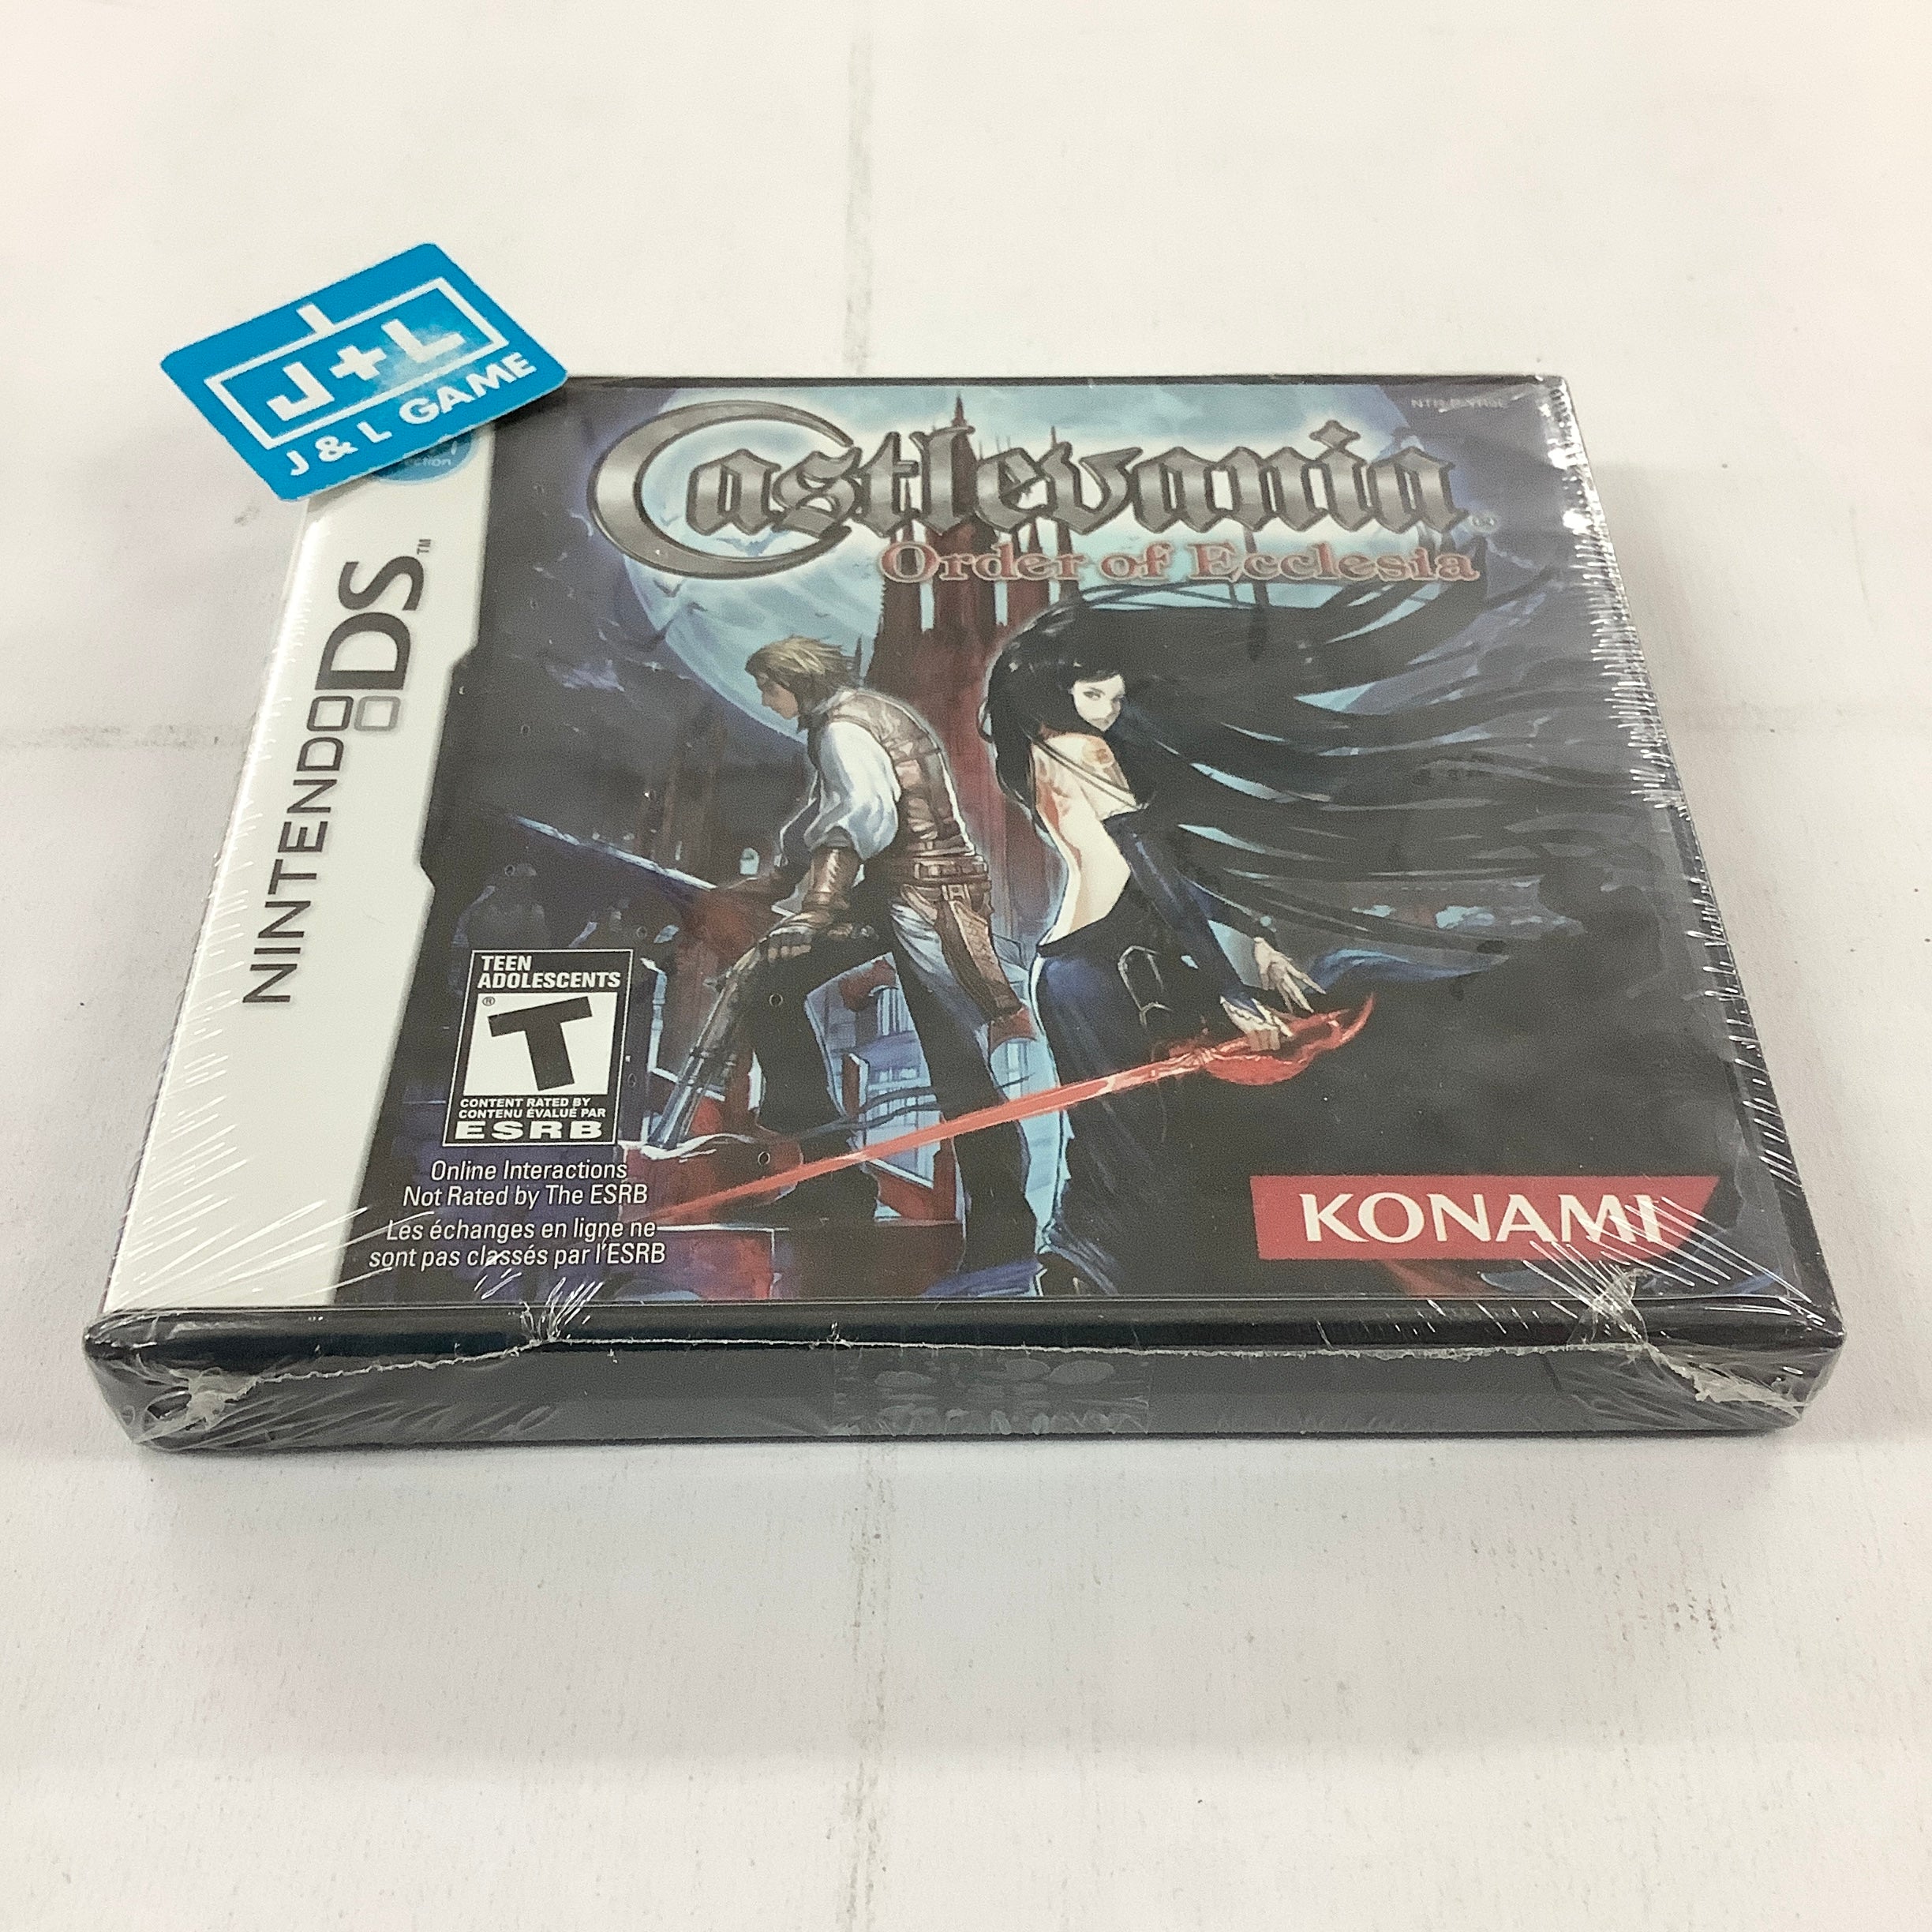 Castlevania: Order of Ecclesia - (NDS) Nintendo DS